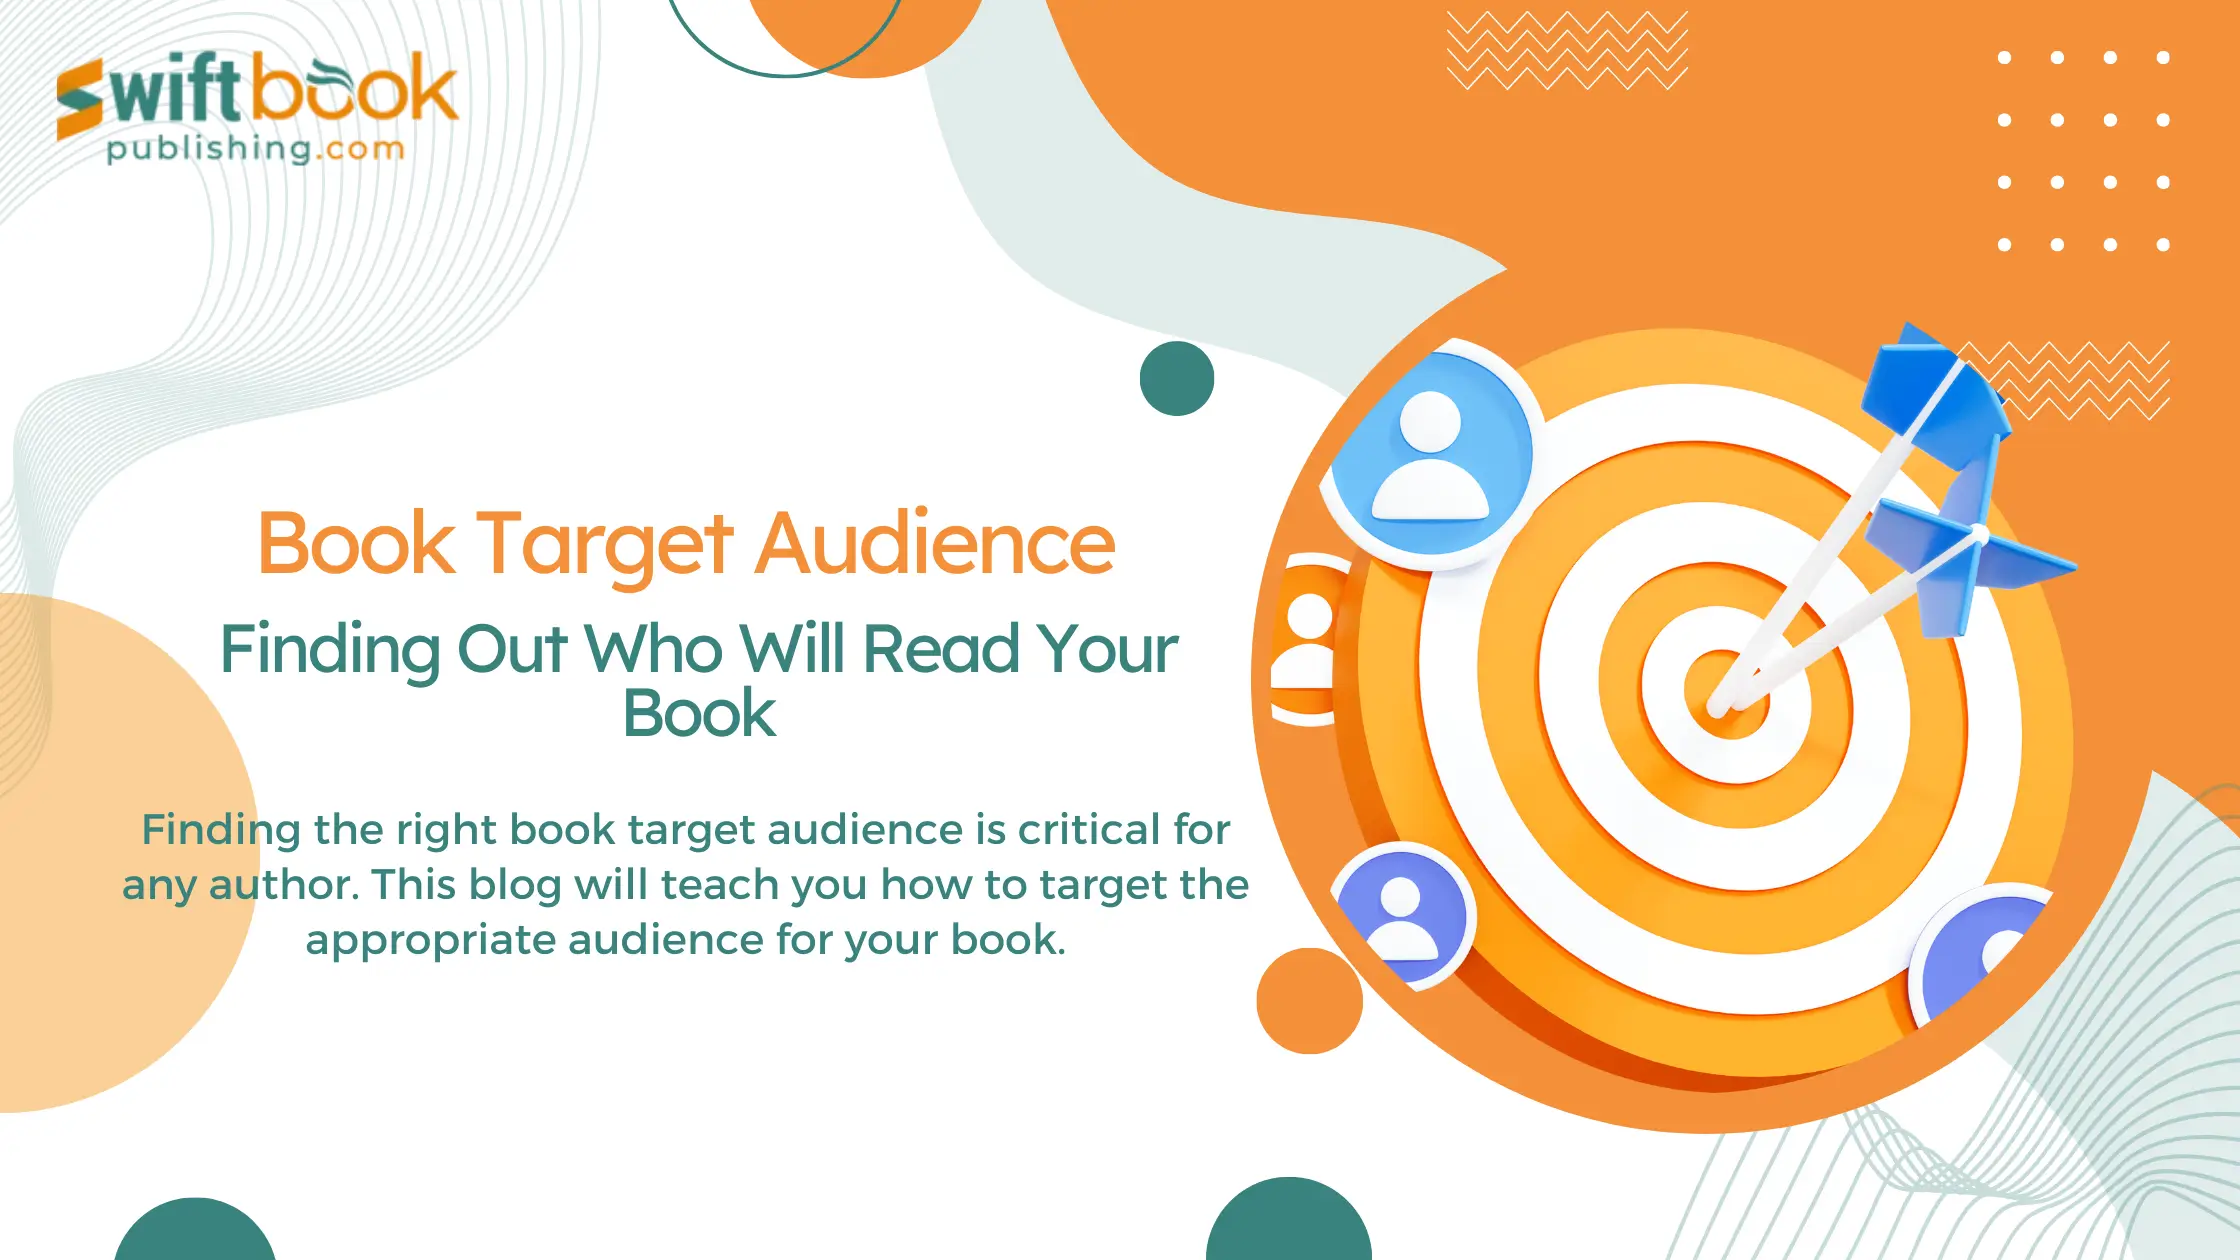 How to Find the Right Book Target Audience